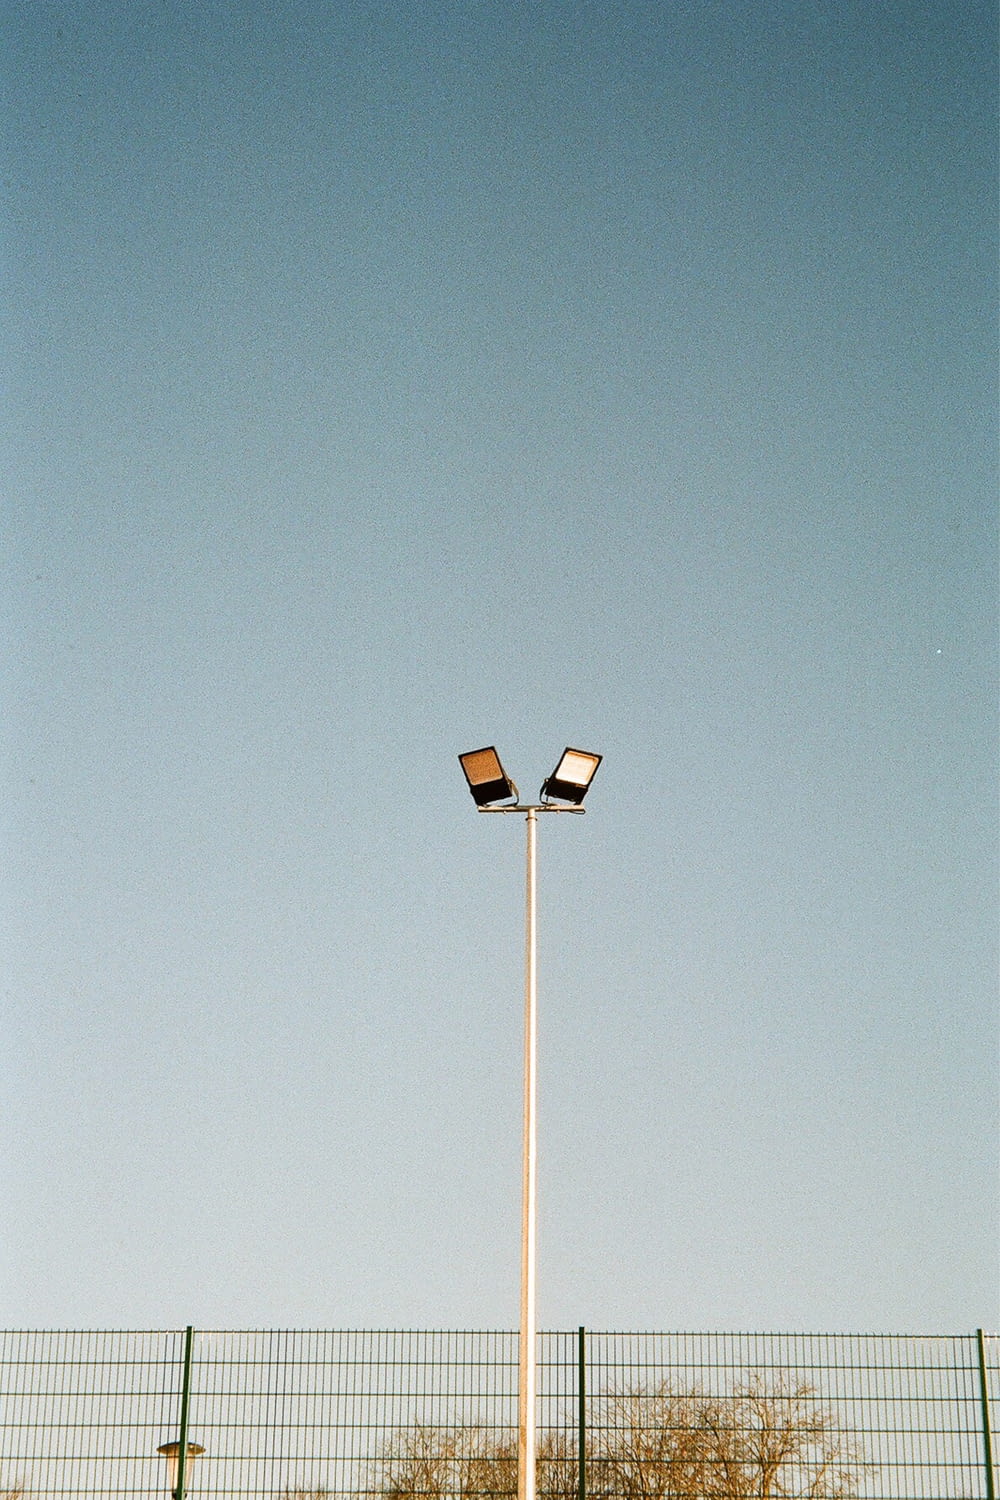 a couple of street lights sitting next to a fence